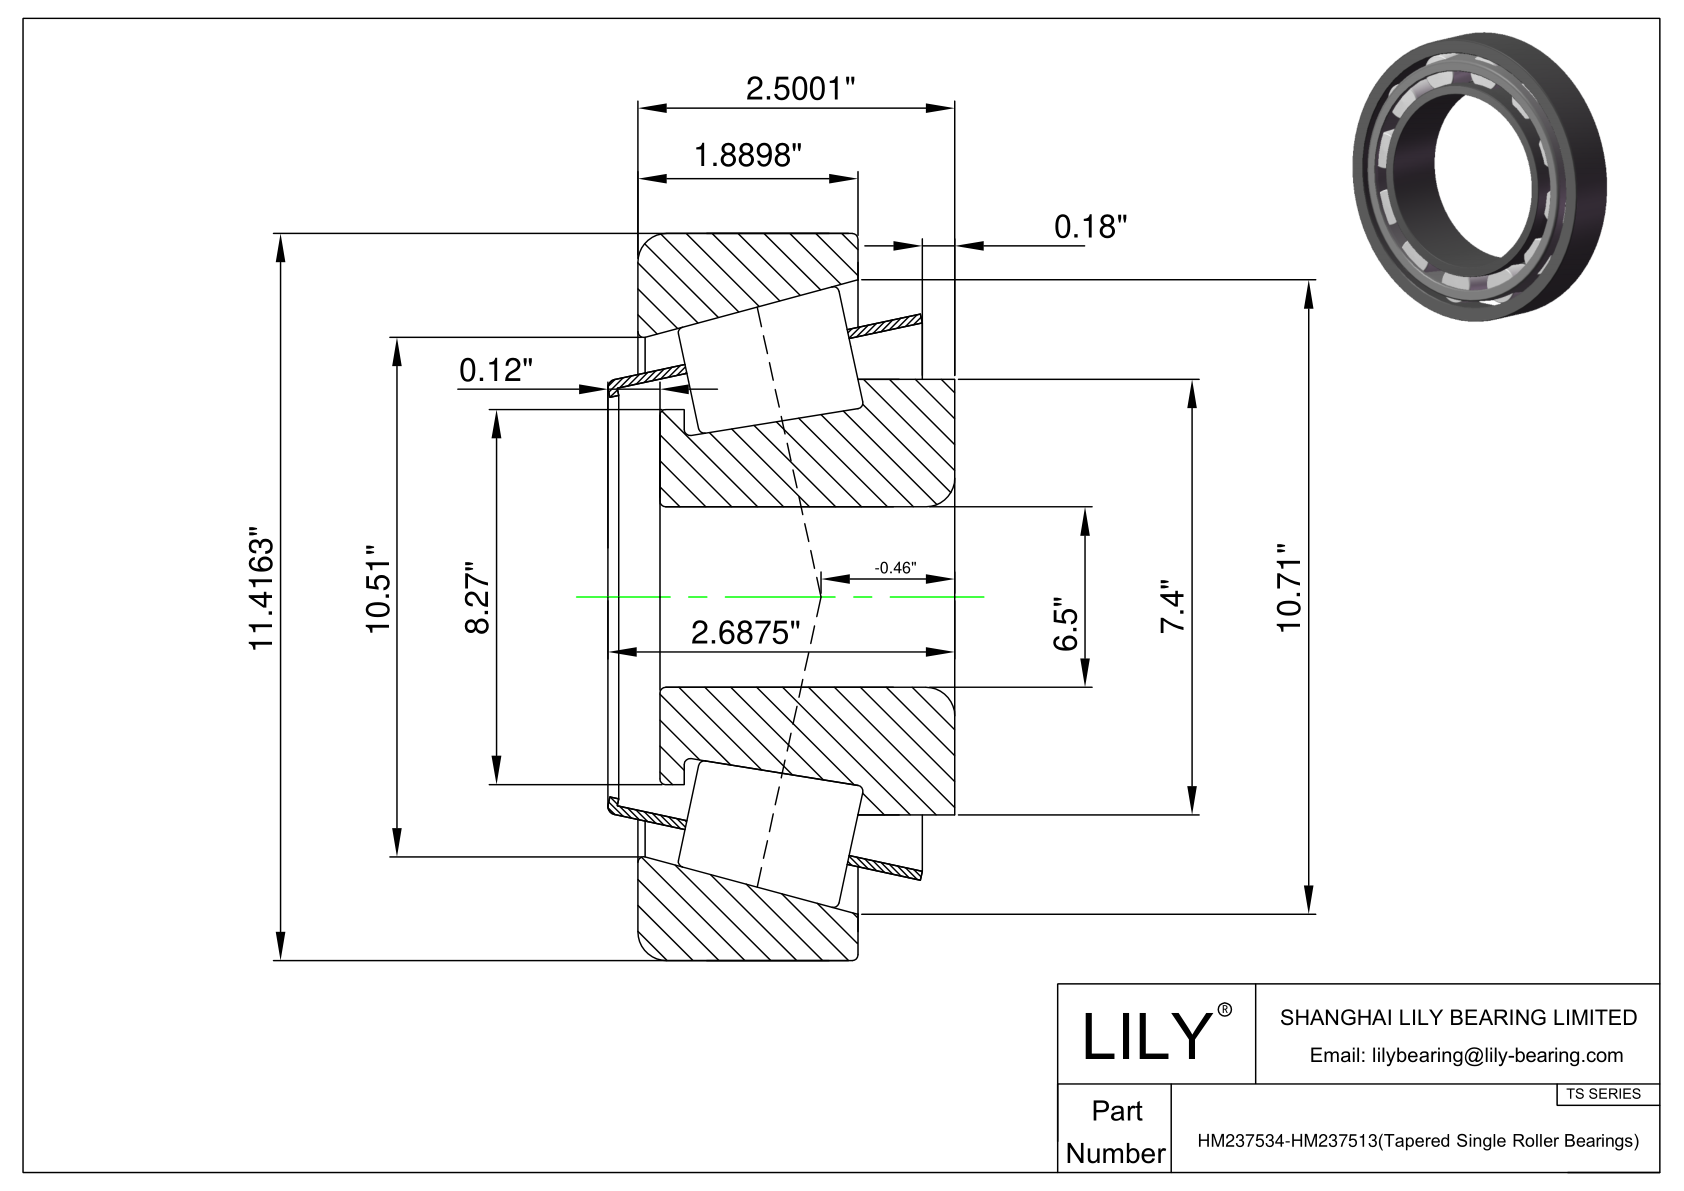 HM237534-HM237513 TS (Tapered Single Roller Bearings) (Imperial) cad drawing